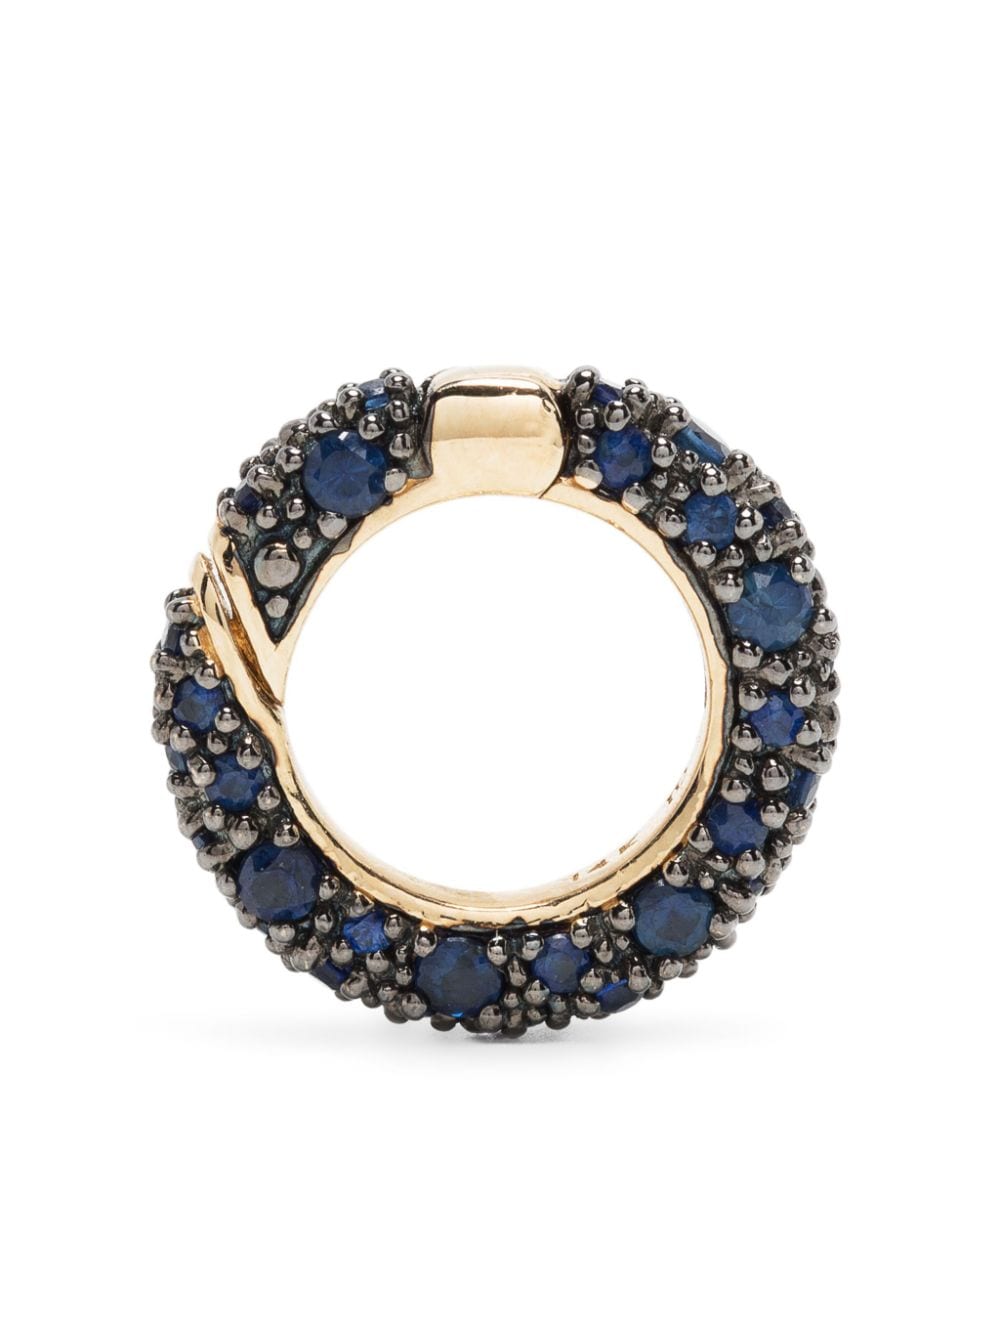 Lucy Delius Jewellery The Blue Sapphire Verbindungsstück - Blau von Lucy Delius Jewellery